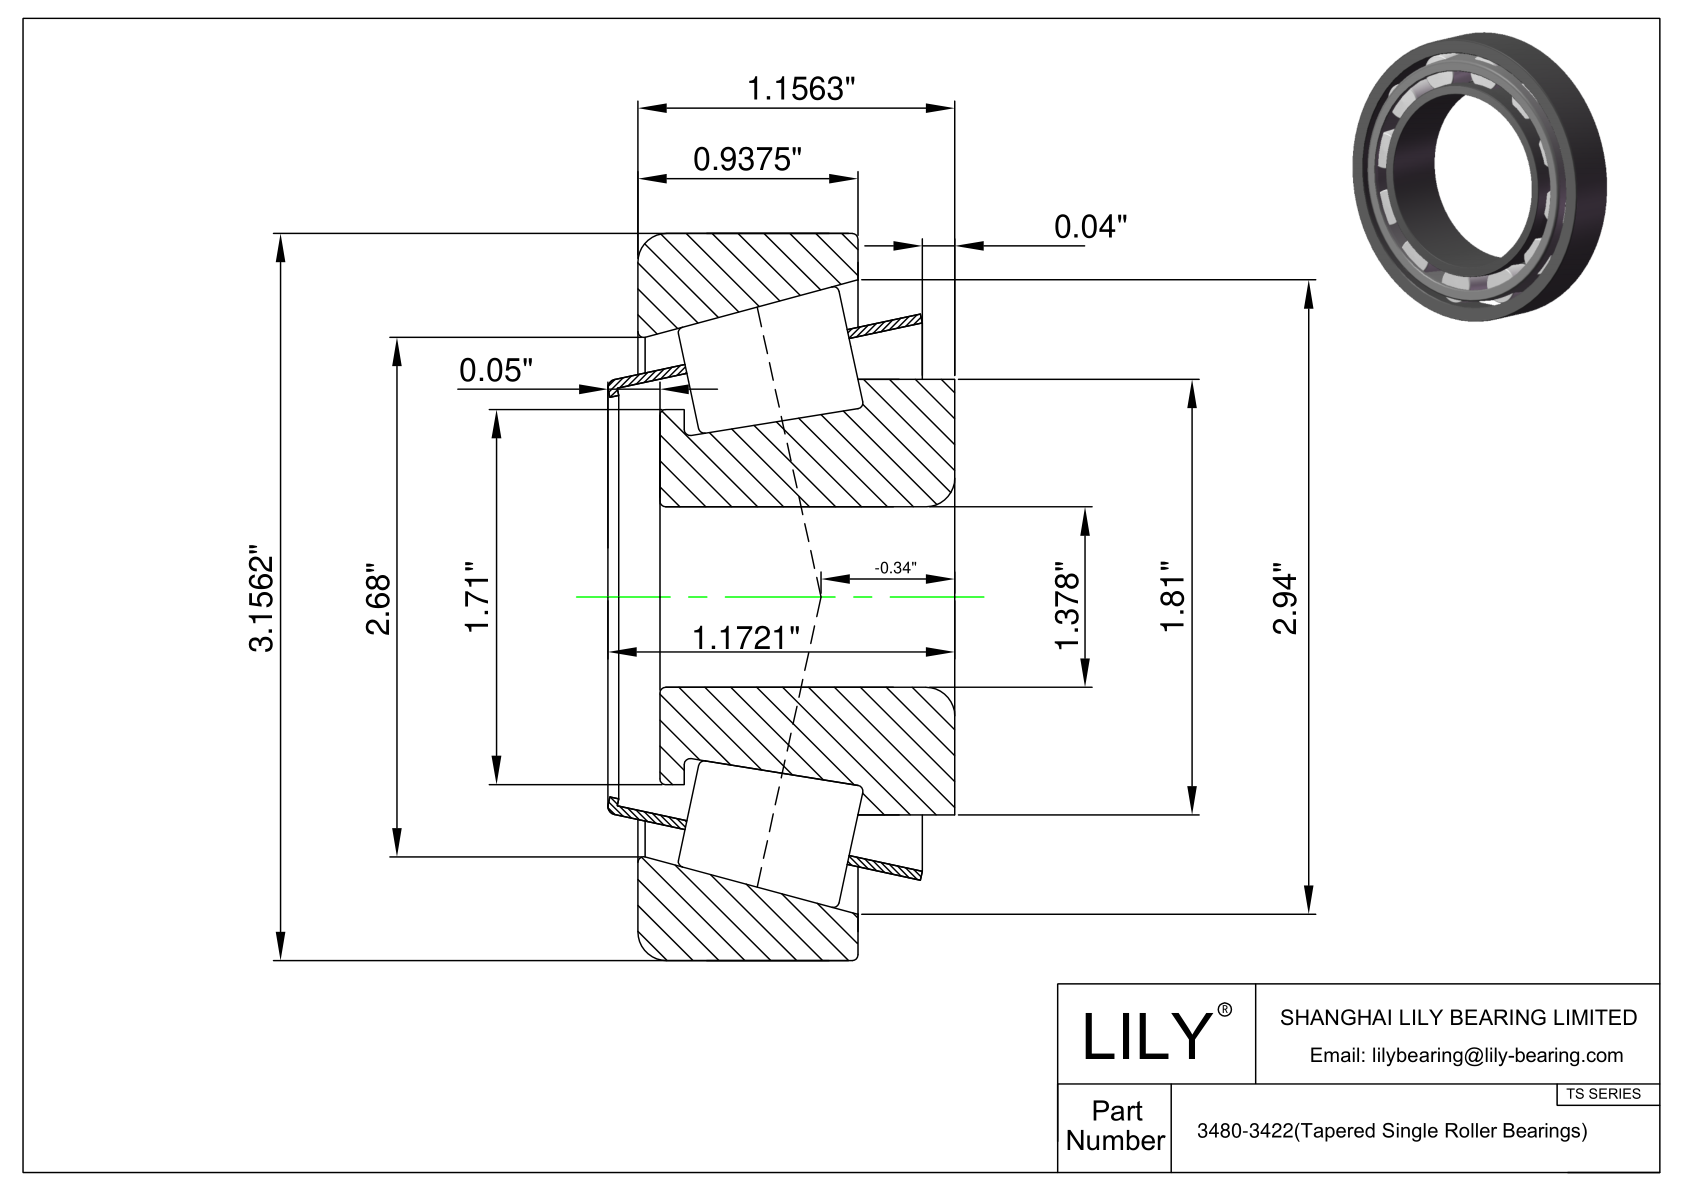 3480-3422 TS (Tapered Single Roller Bearings) (Imperial) cad drawing